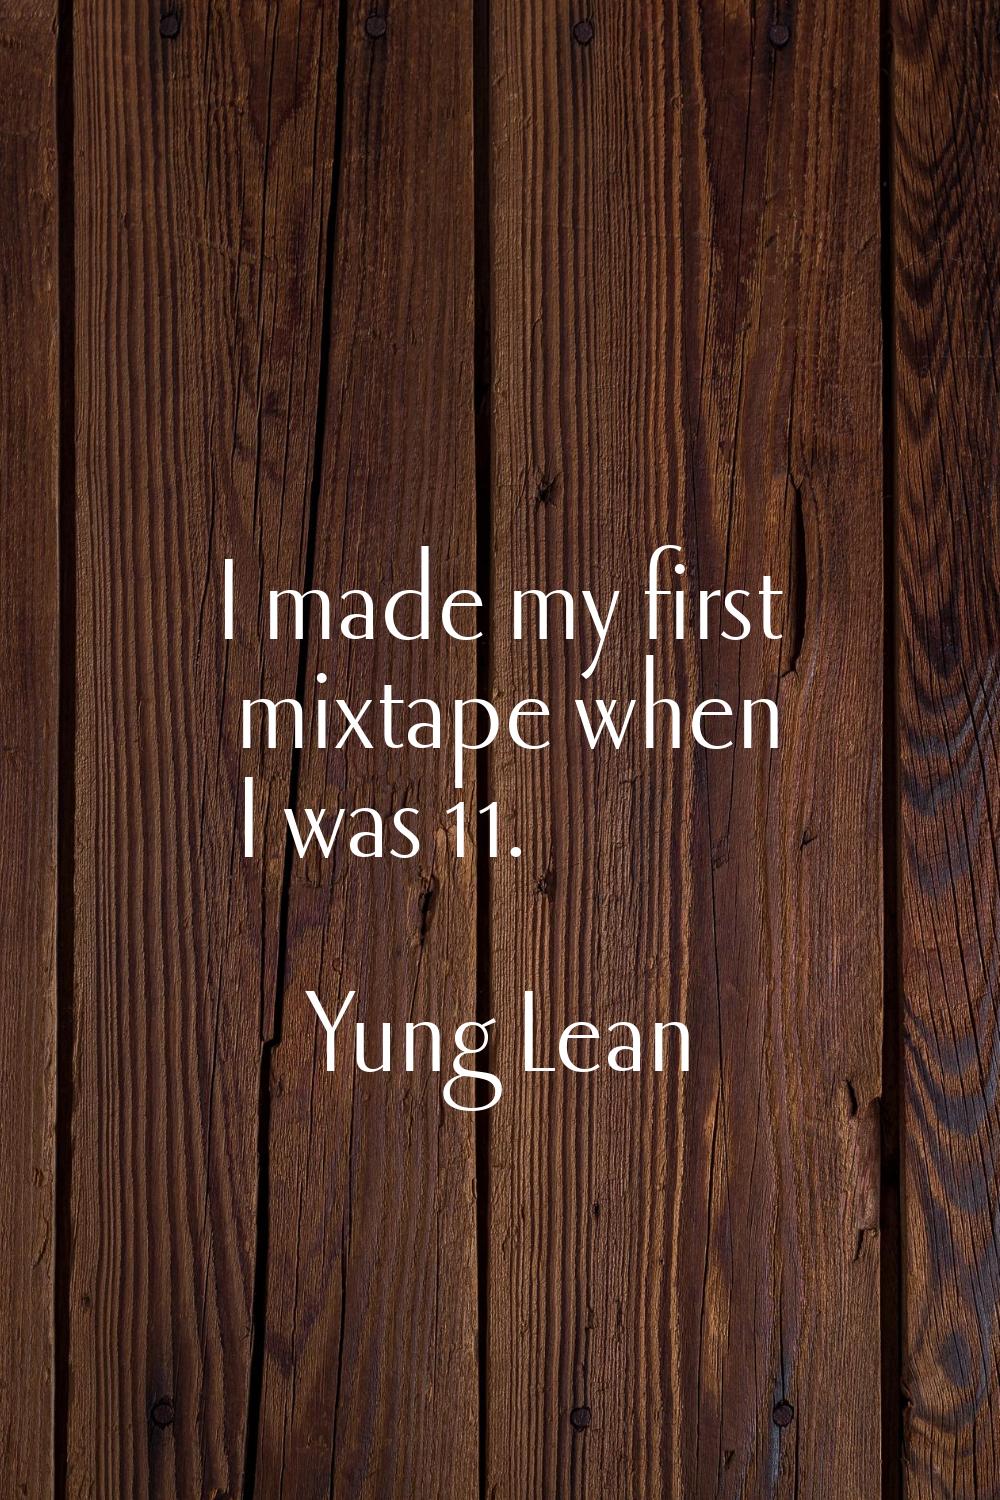 I made my first mixtape when I was 11.